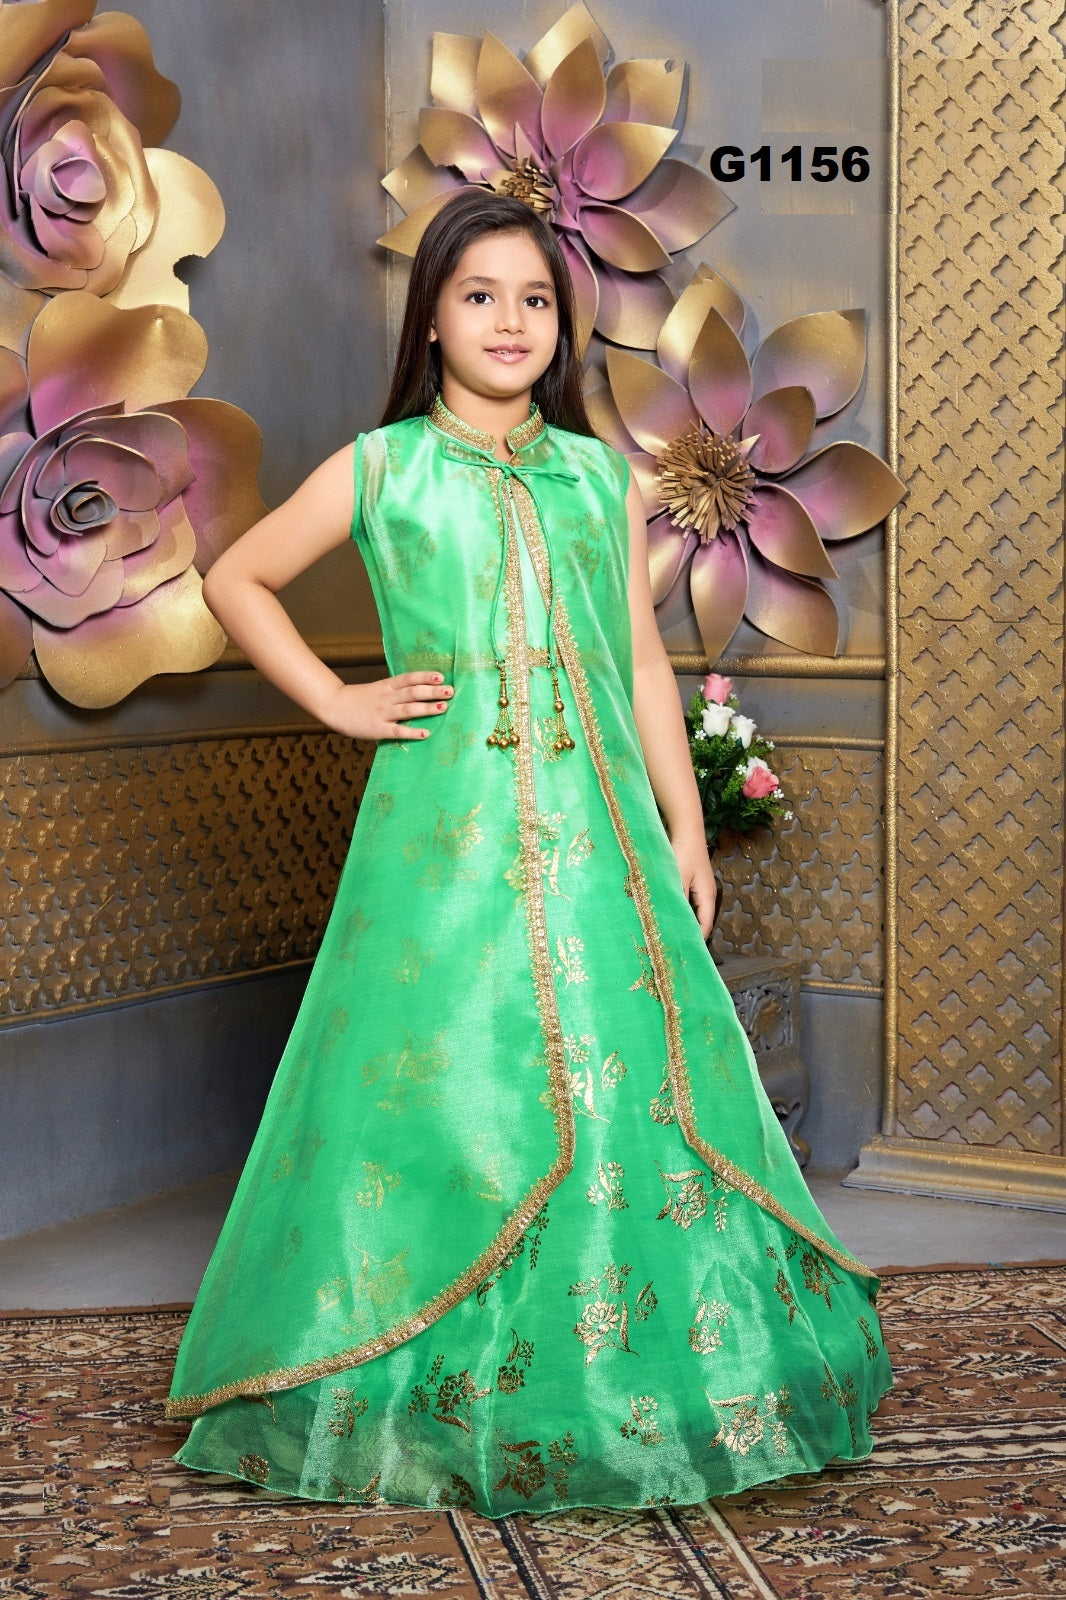 G1156 - Green  and Gold Girls Long Gown